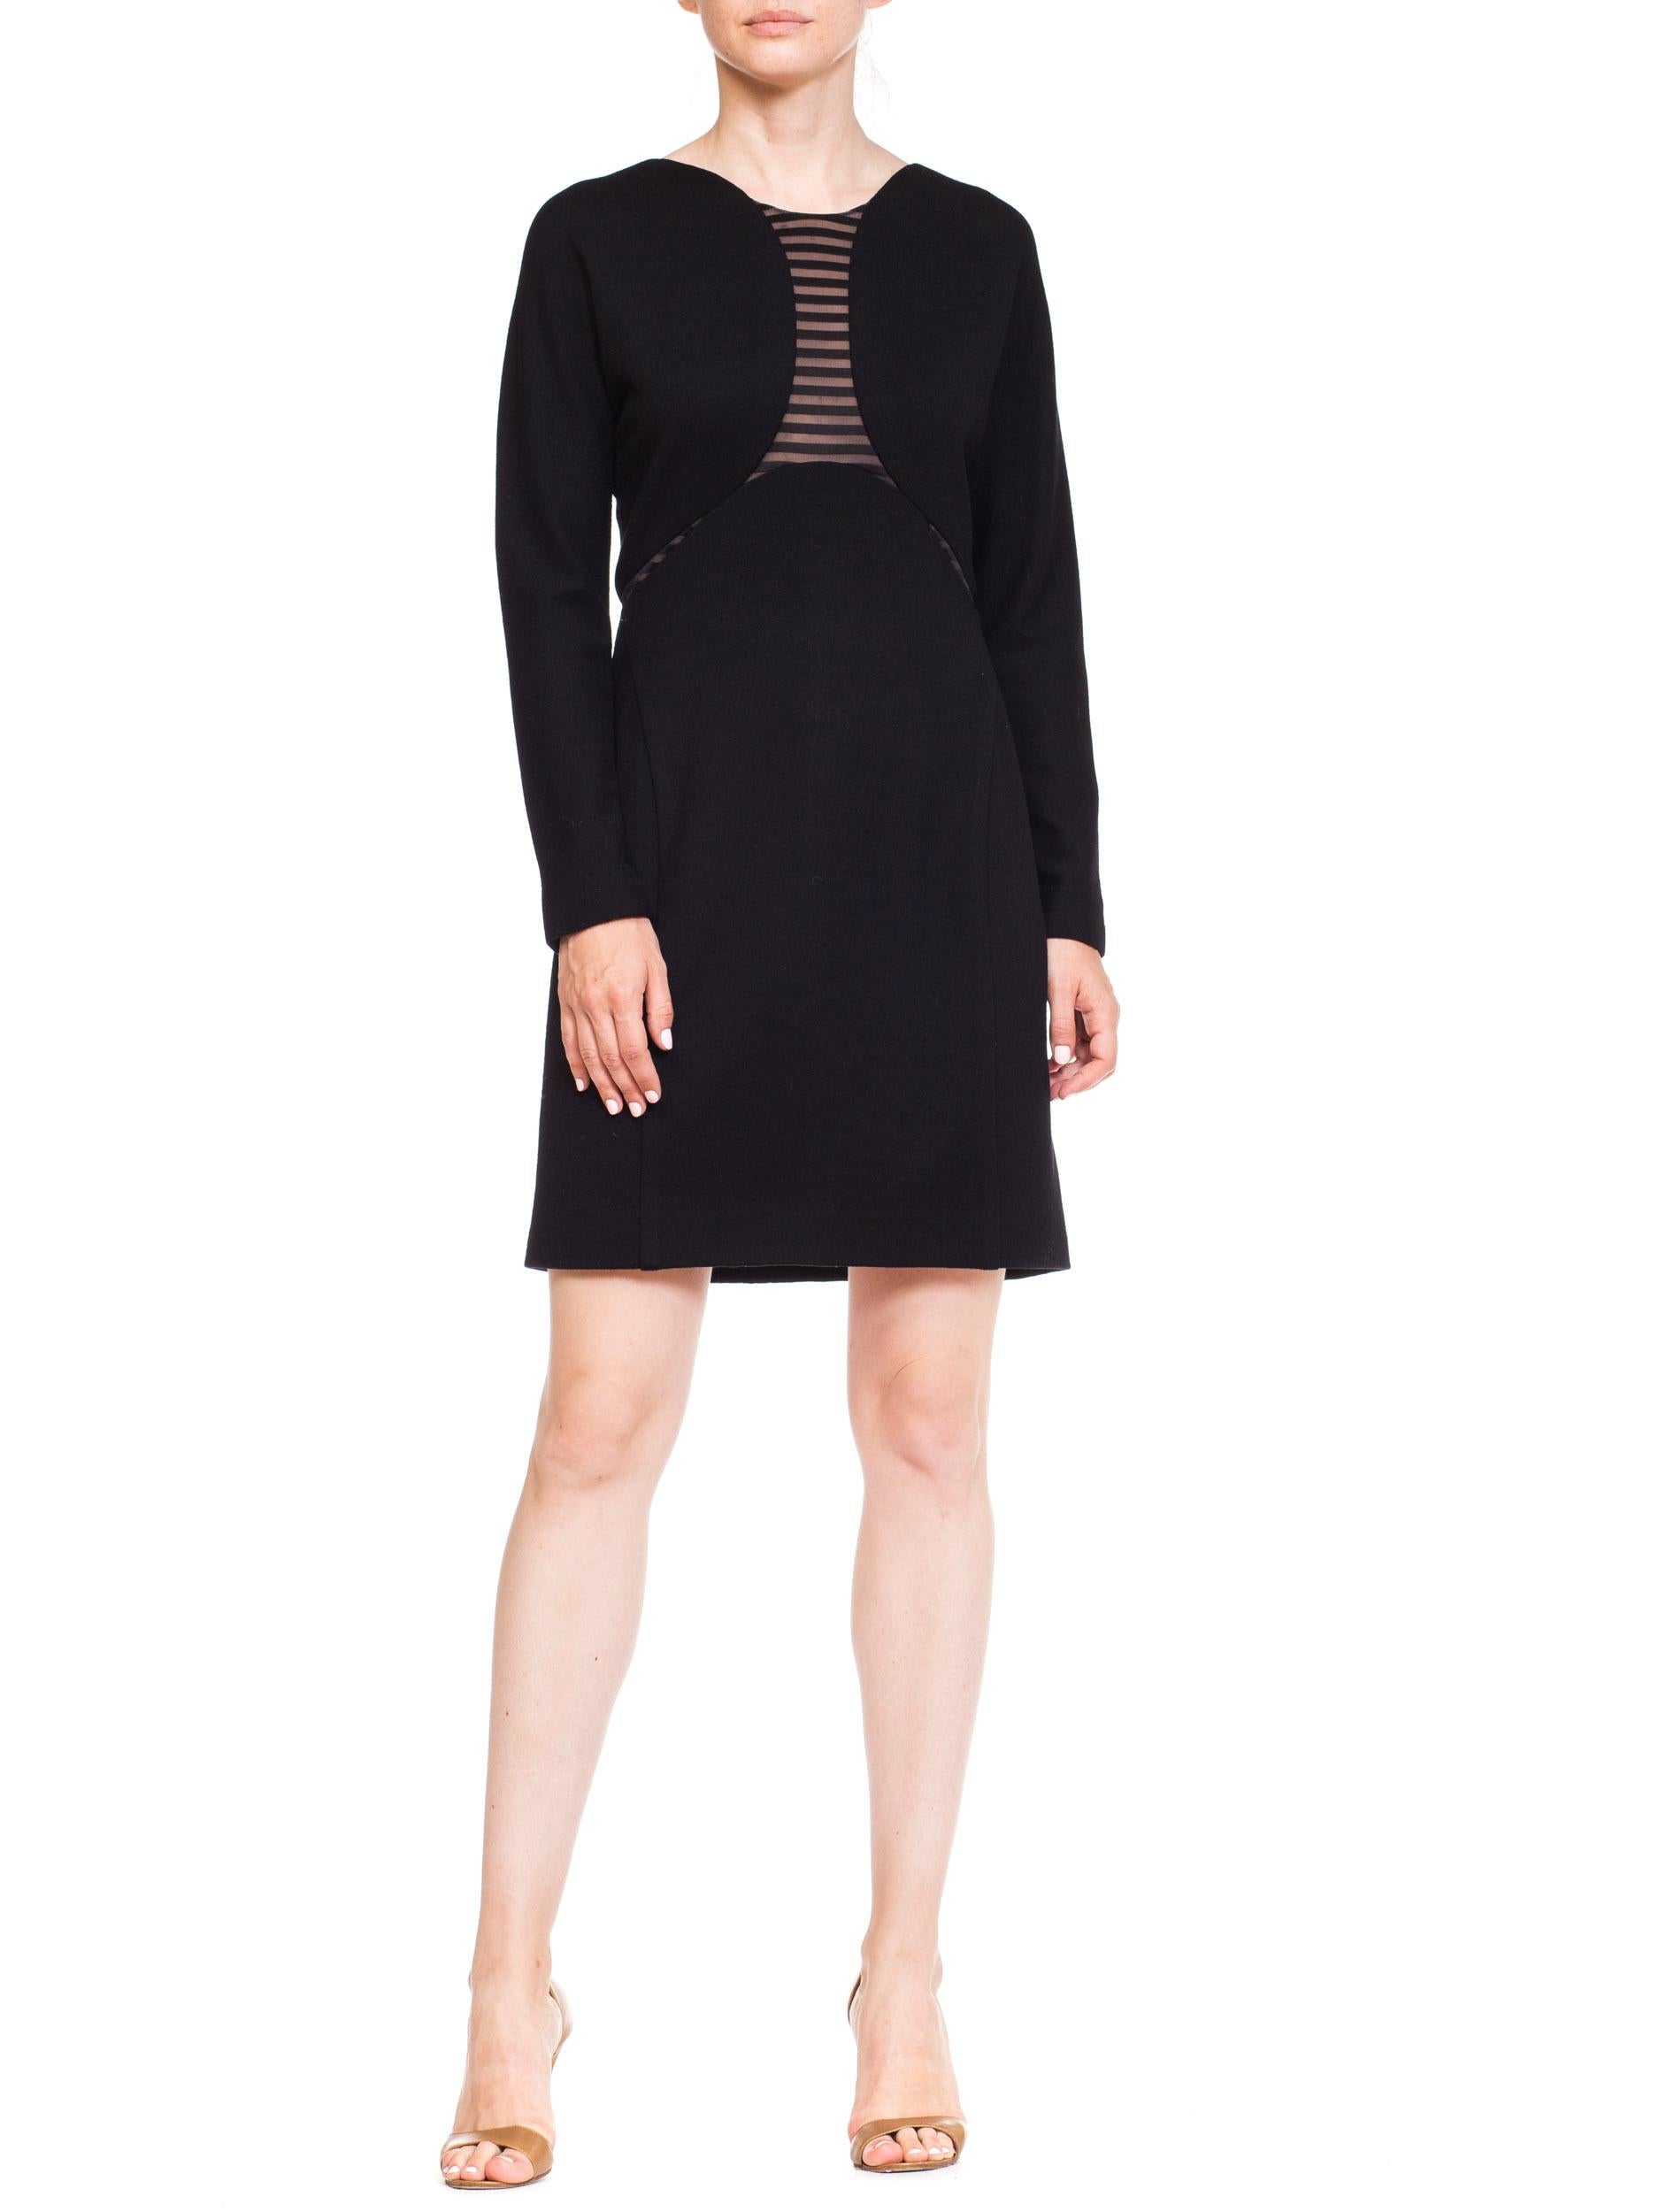 1990S GEOFFREY BEENE Black Wool Jersey Long Sleeve  Dress With Sheer Striped Pa In Excellent Condition For Sale In New York, NY